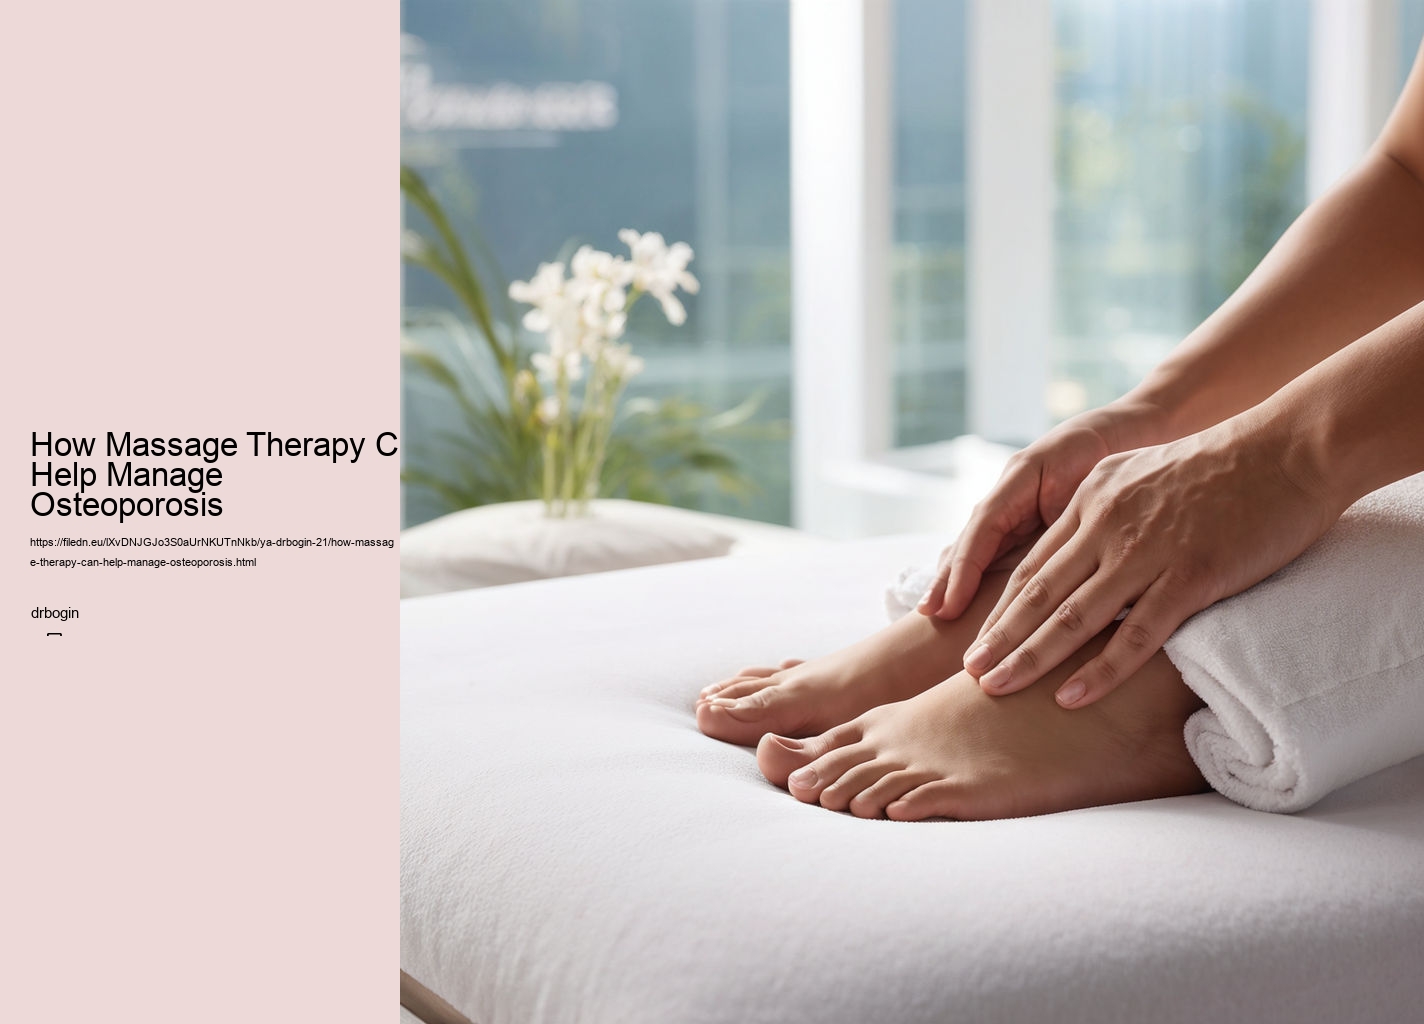 How Massage Therapy Can Help Manage Osteoporosis